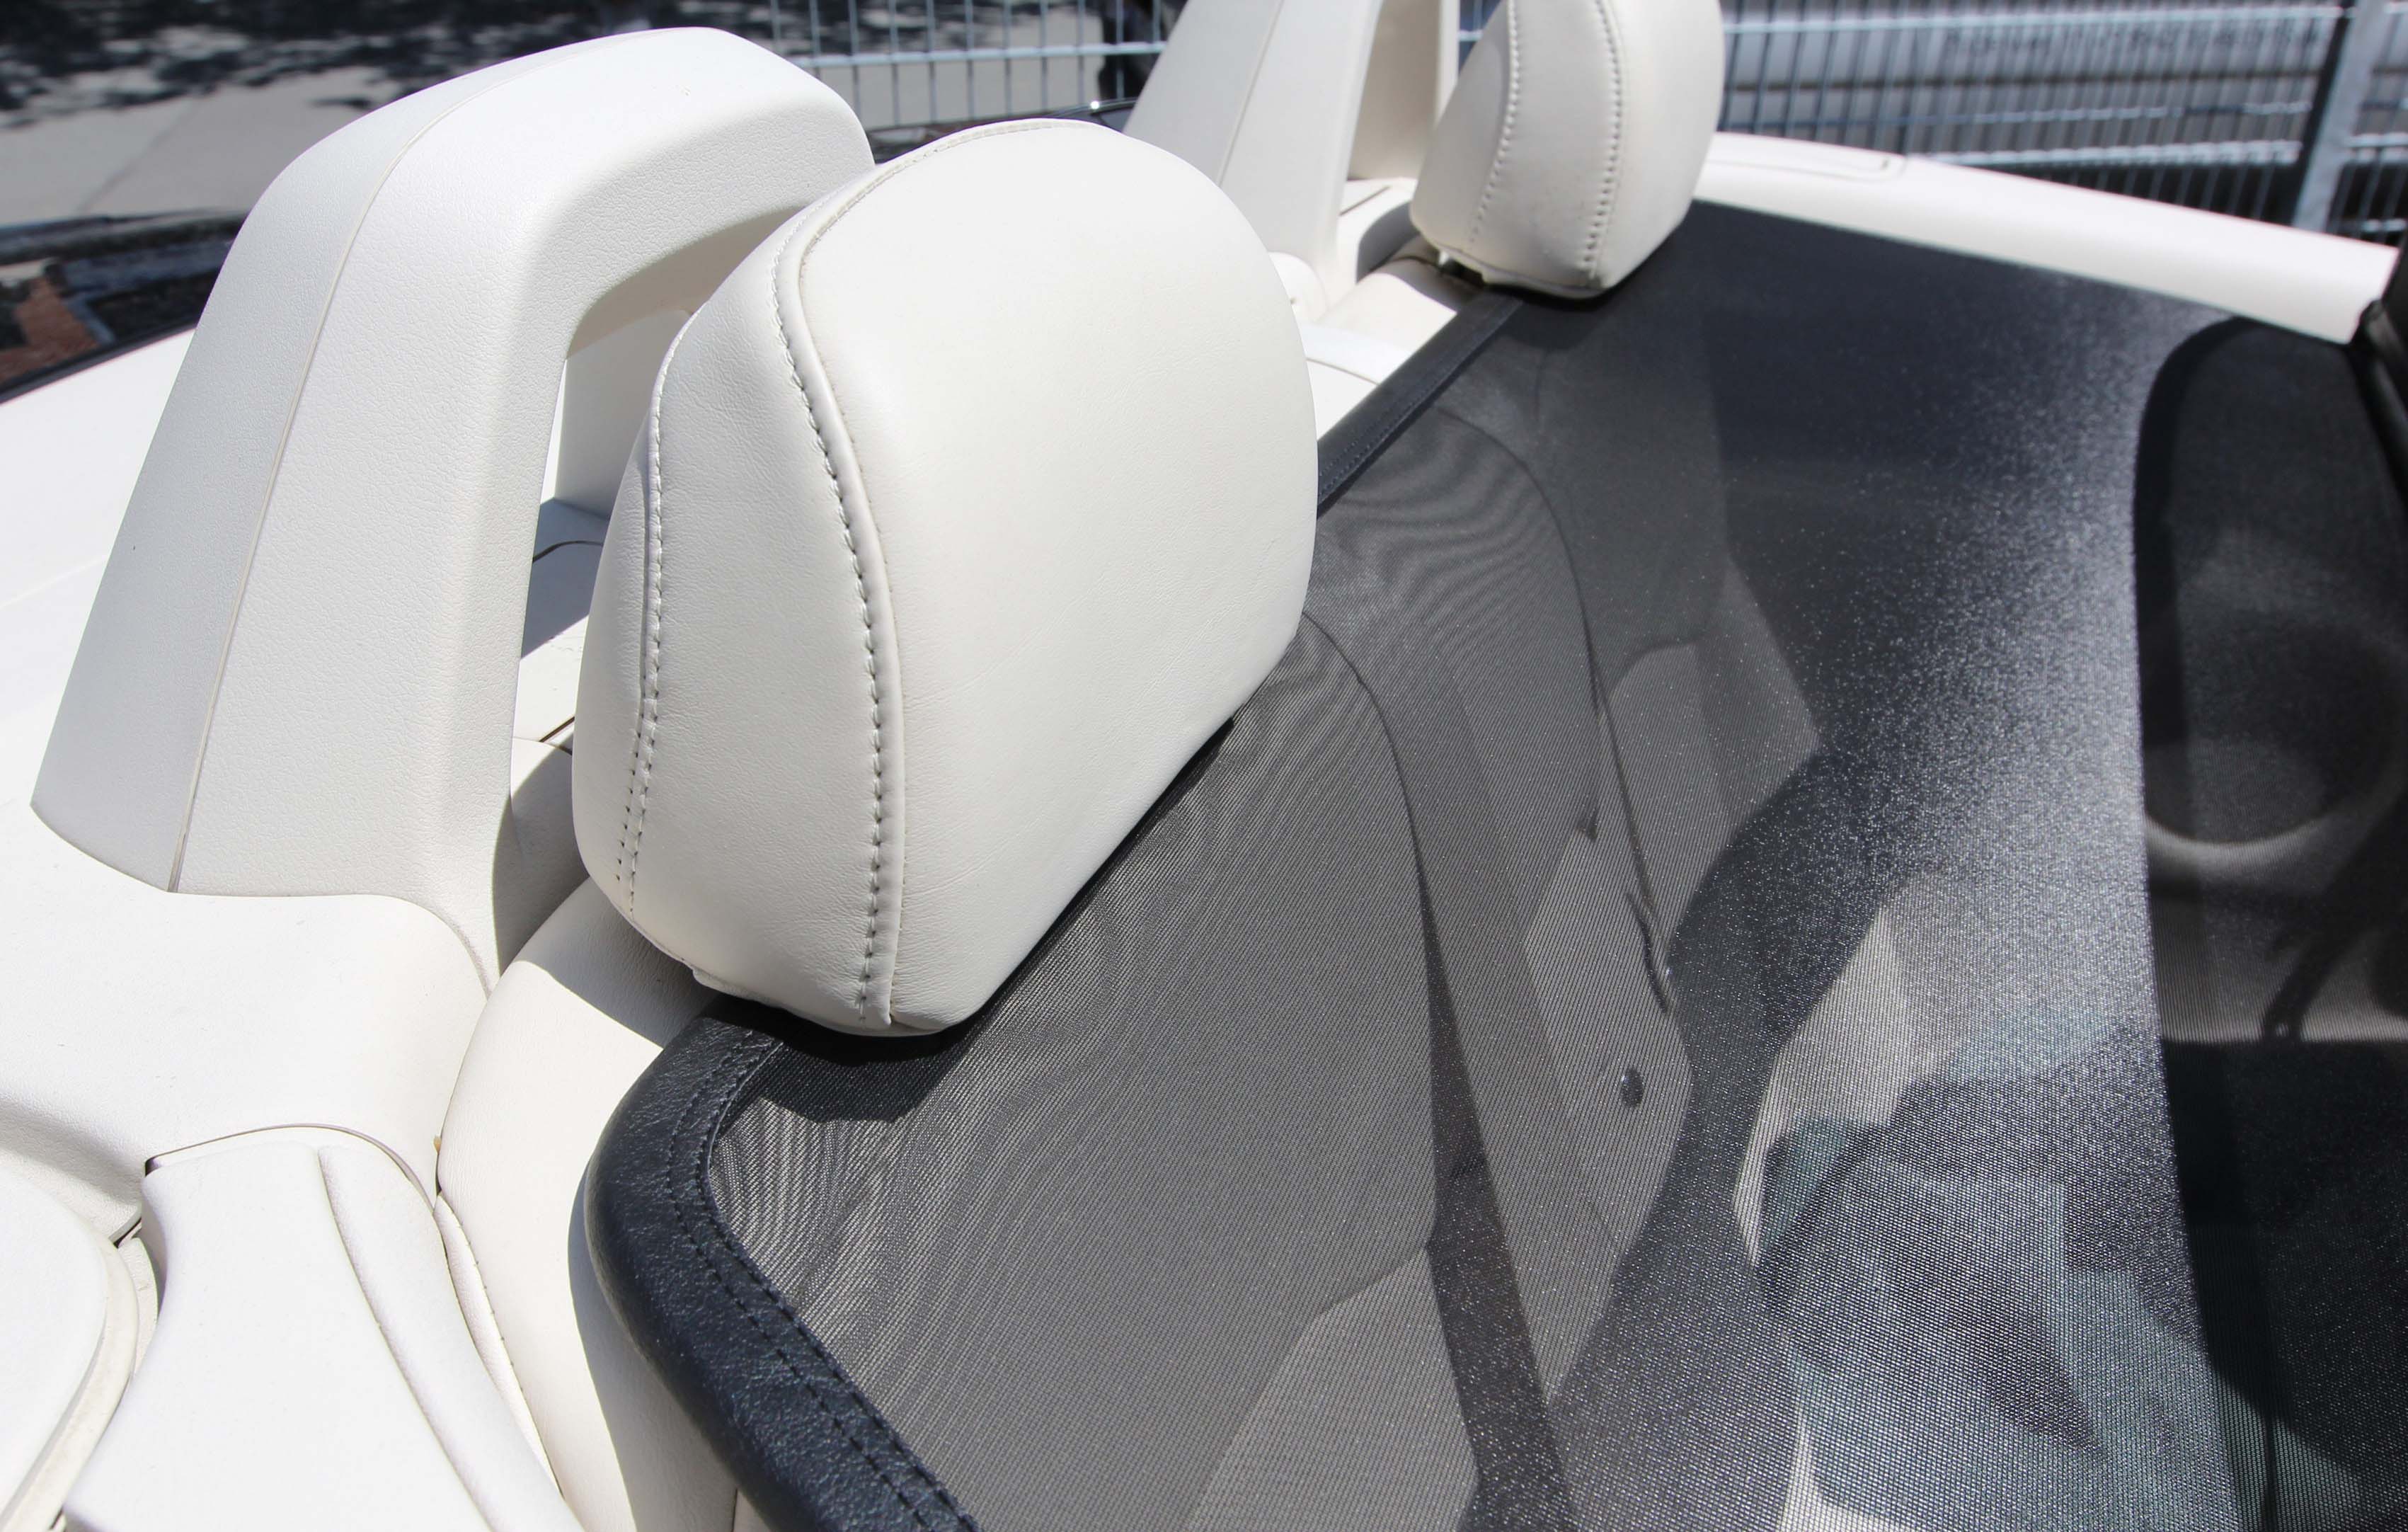 AIRAX wind deflector for Lexus IS 250C with quick release